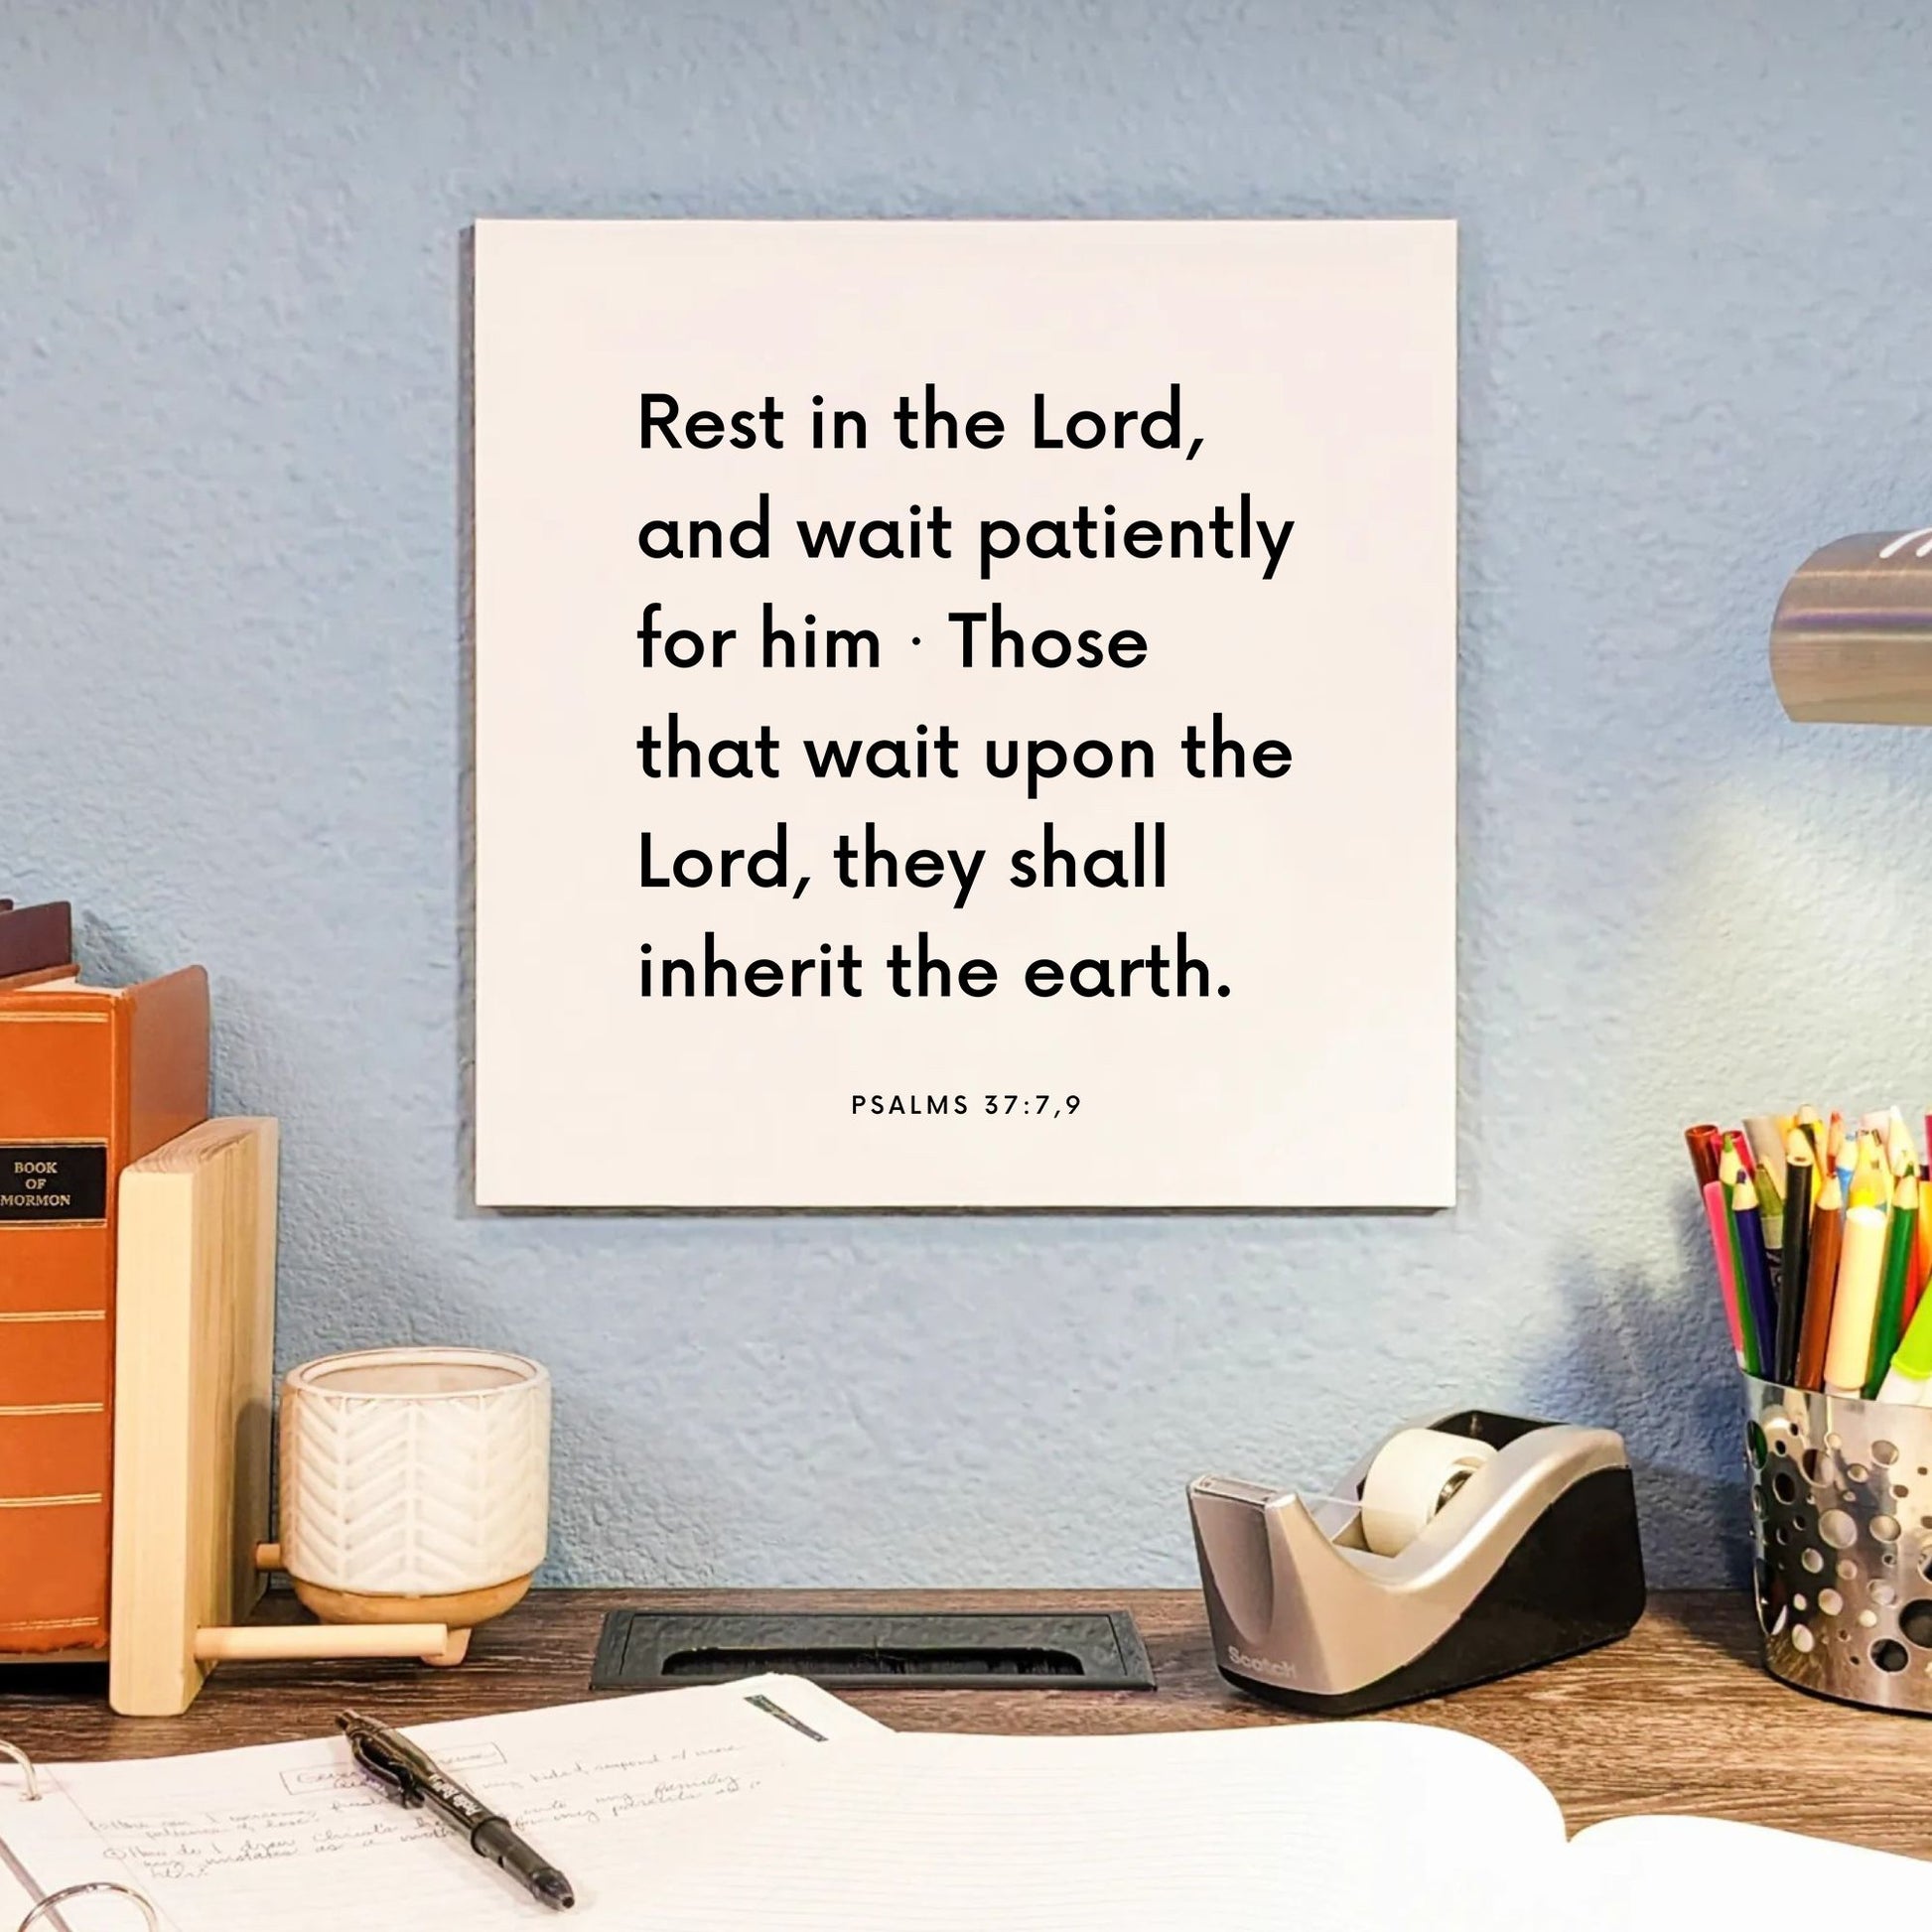 Desk mouting of the scripture tile for Psalms 37:7,9 - "Rest in the Lord, and wait patiently for him"